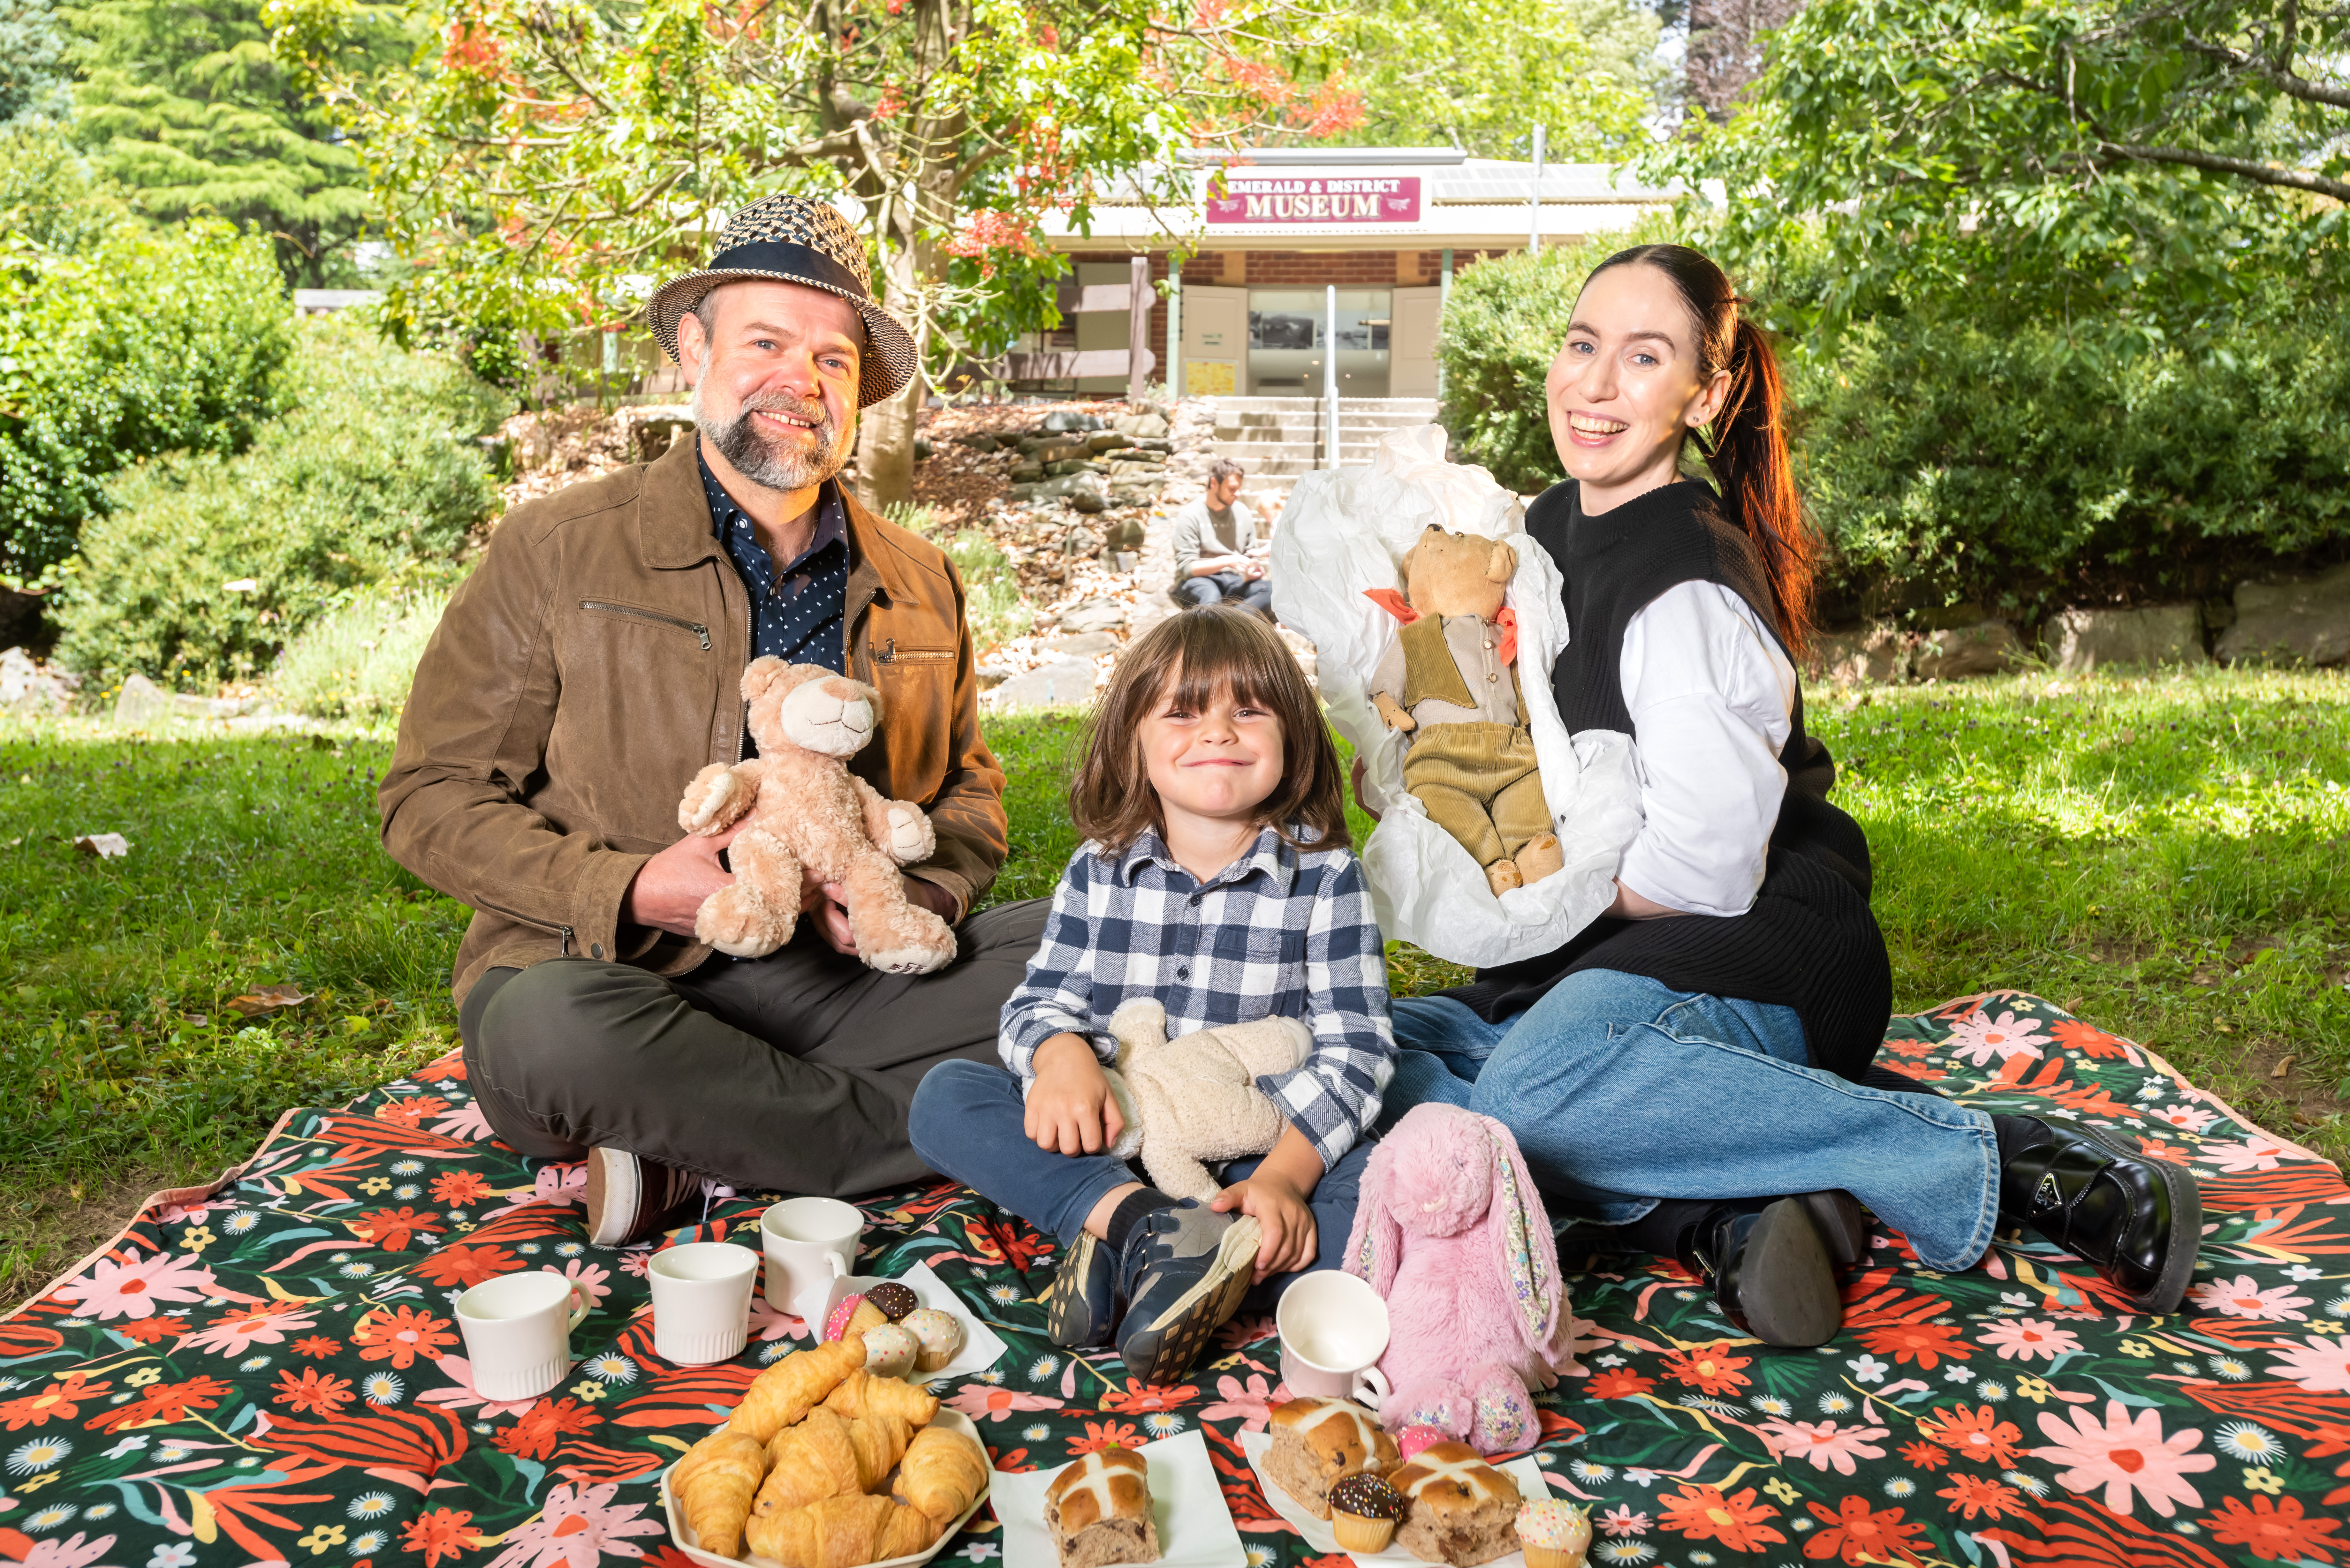 Ranges Ward Councillor Jeff Springfield enjoyed a teddy bears’ picnic with his nephew, Leo, and Emerald Museum Officer, Natalie Bradvica, ahead of the Australian Heritage Festival this April.